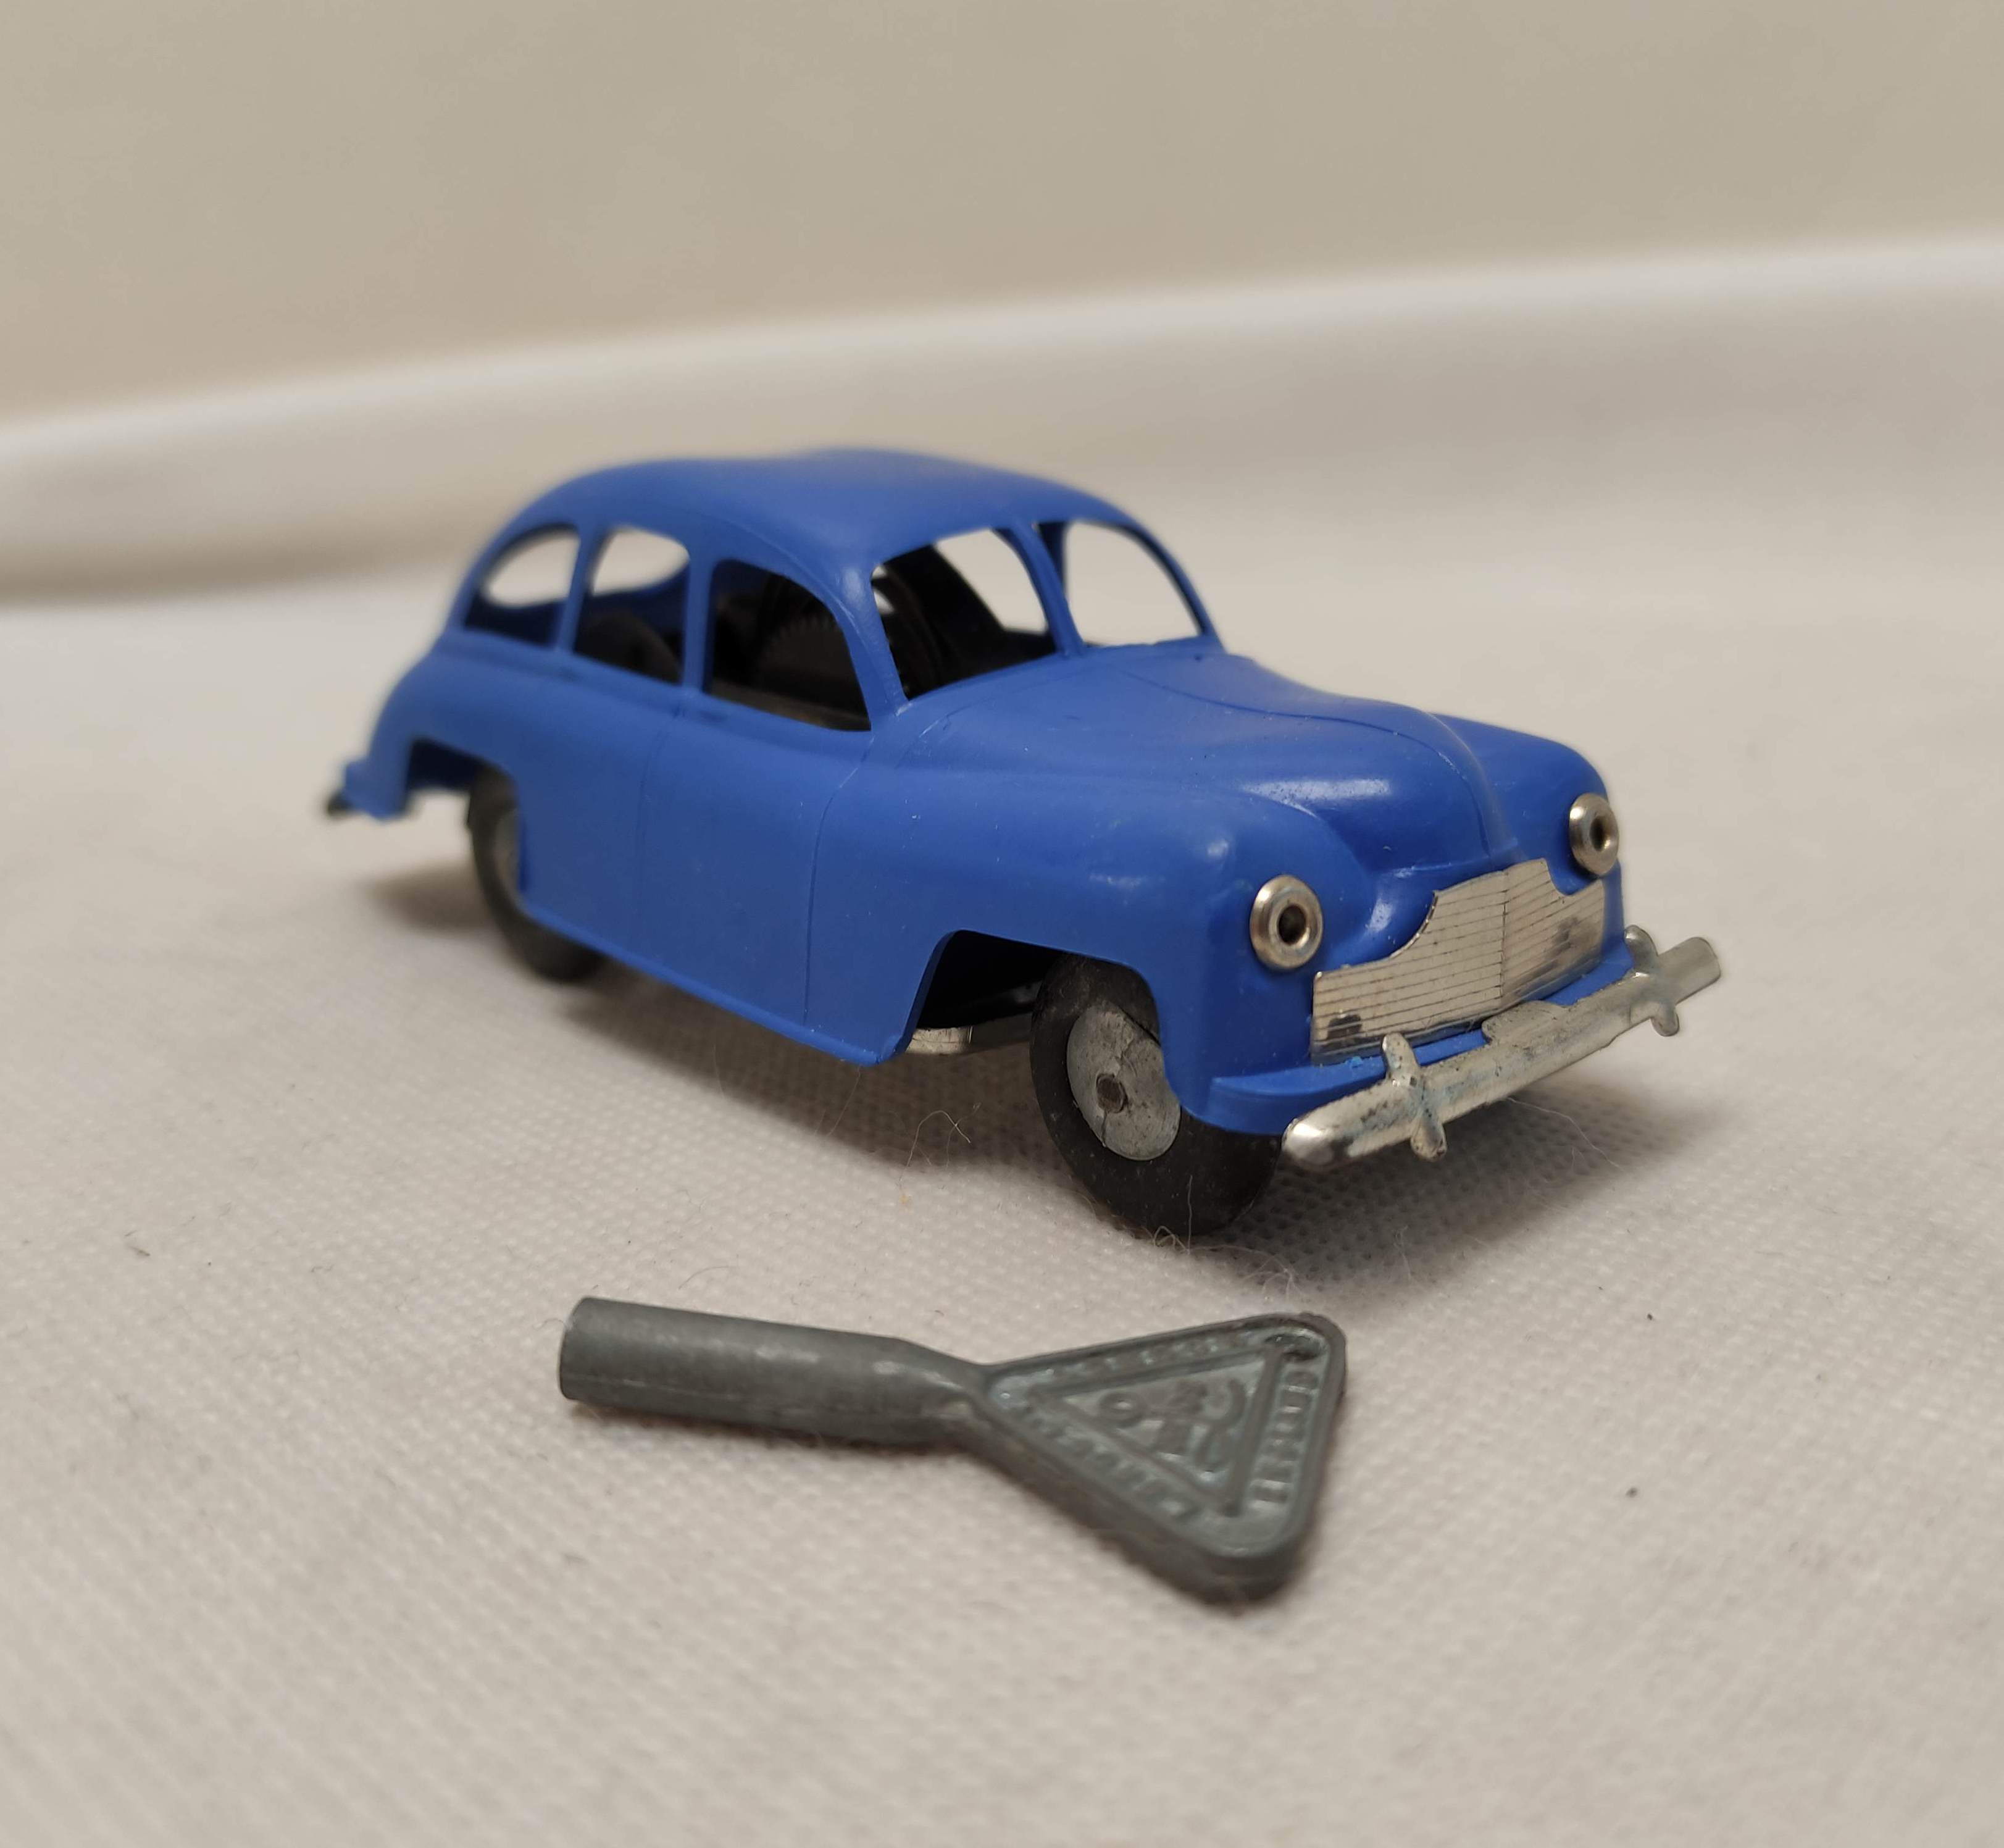 Tri-ang Minic Standard Vanguard clockwork car with blue plastic body. Complete with original box and - Image 4 of 7